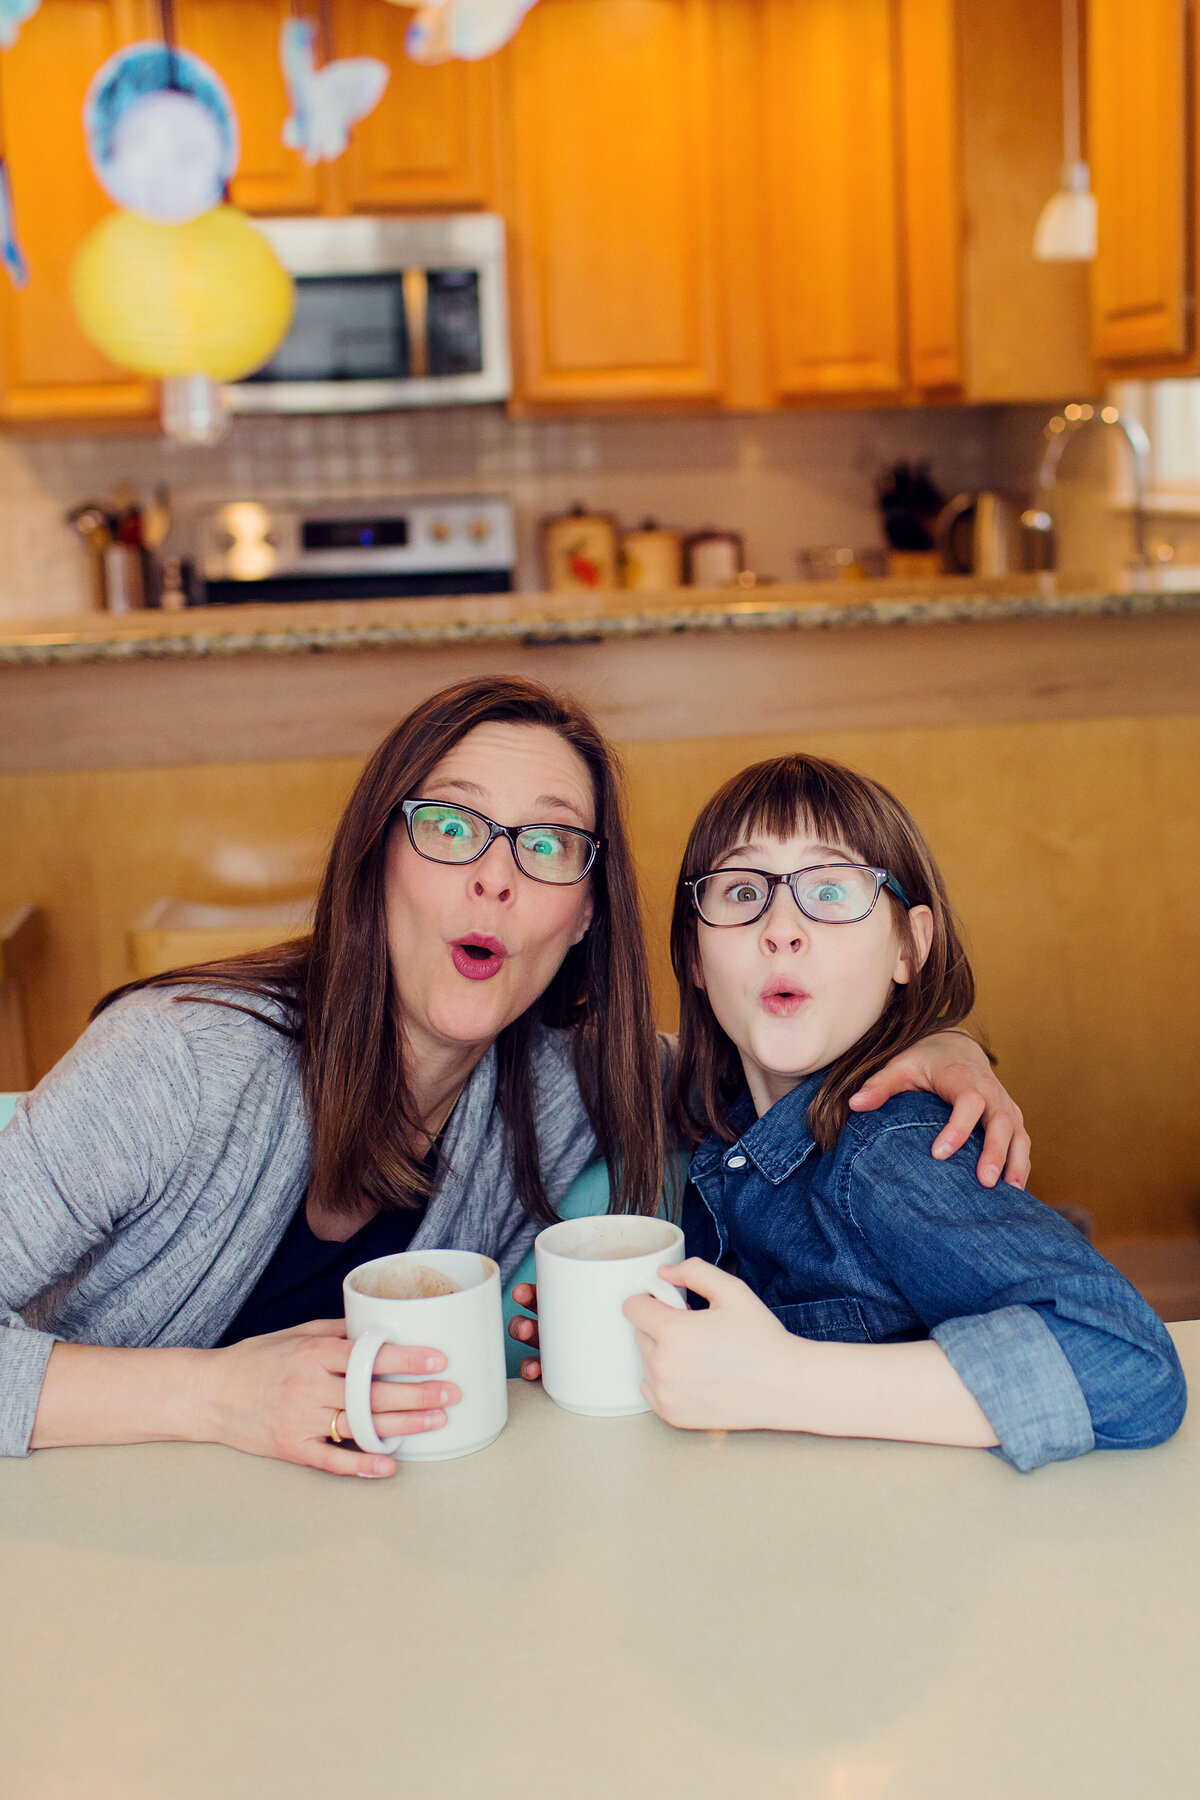 Mom in gray and daughter in blue make a silly, surprised face at the end of their photo session.